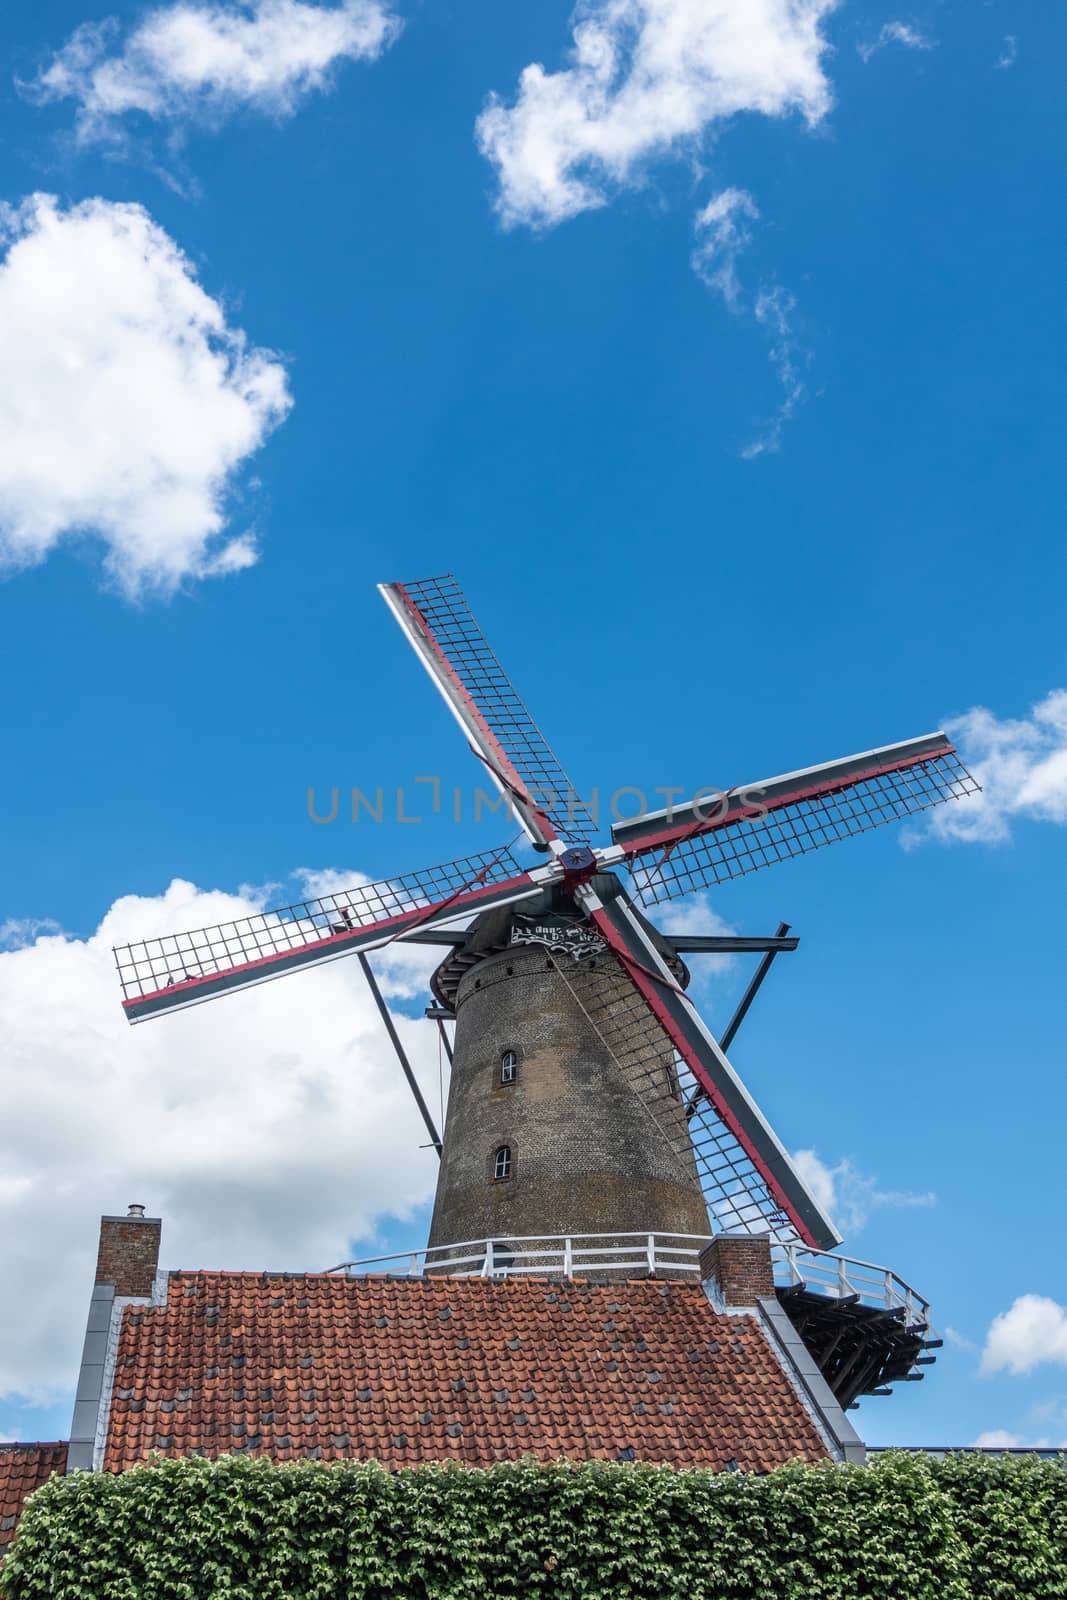 Sluis, the Netherlands -  June 16, 2019: The iconic brick-stone windmill, named Molen Van Sluis, and its four wings stands under deep blue sky with white clouds. Red roof, greem foliage at bottom.